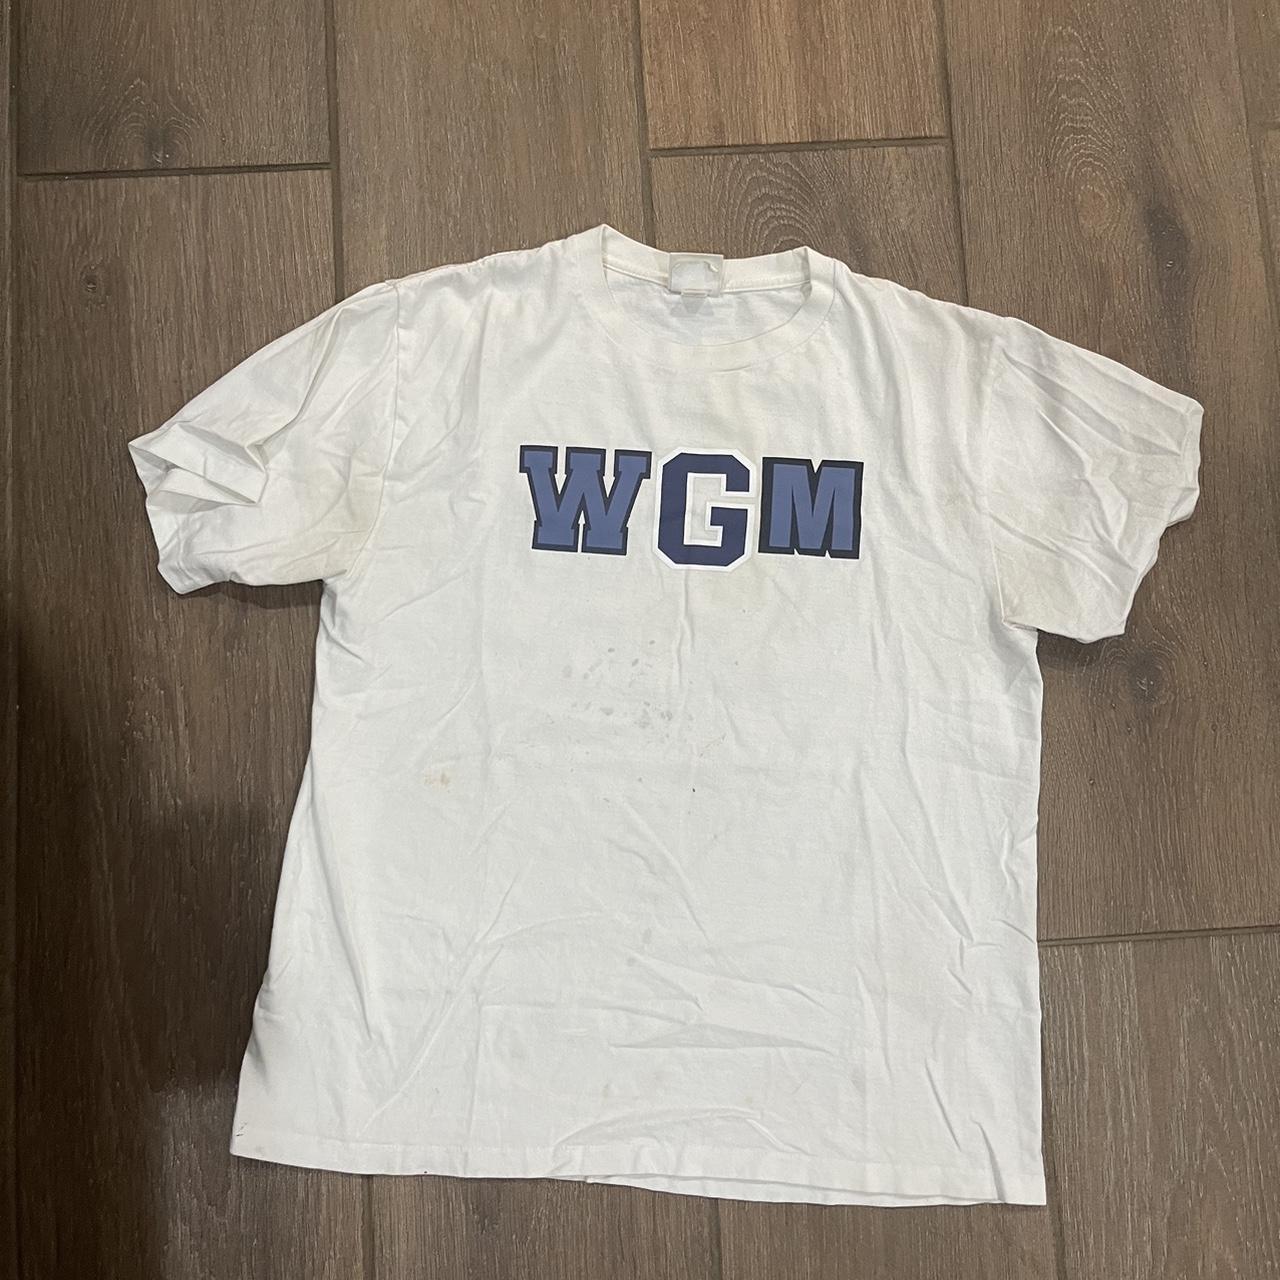 BAPE TEE SIZE LARGE FITS M AS WELL , STAINS ON FRONT,...